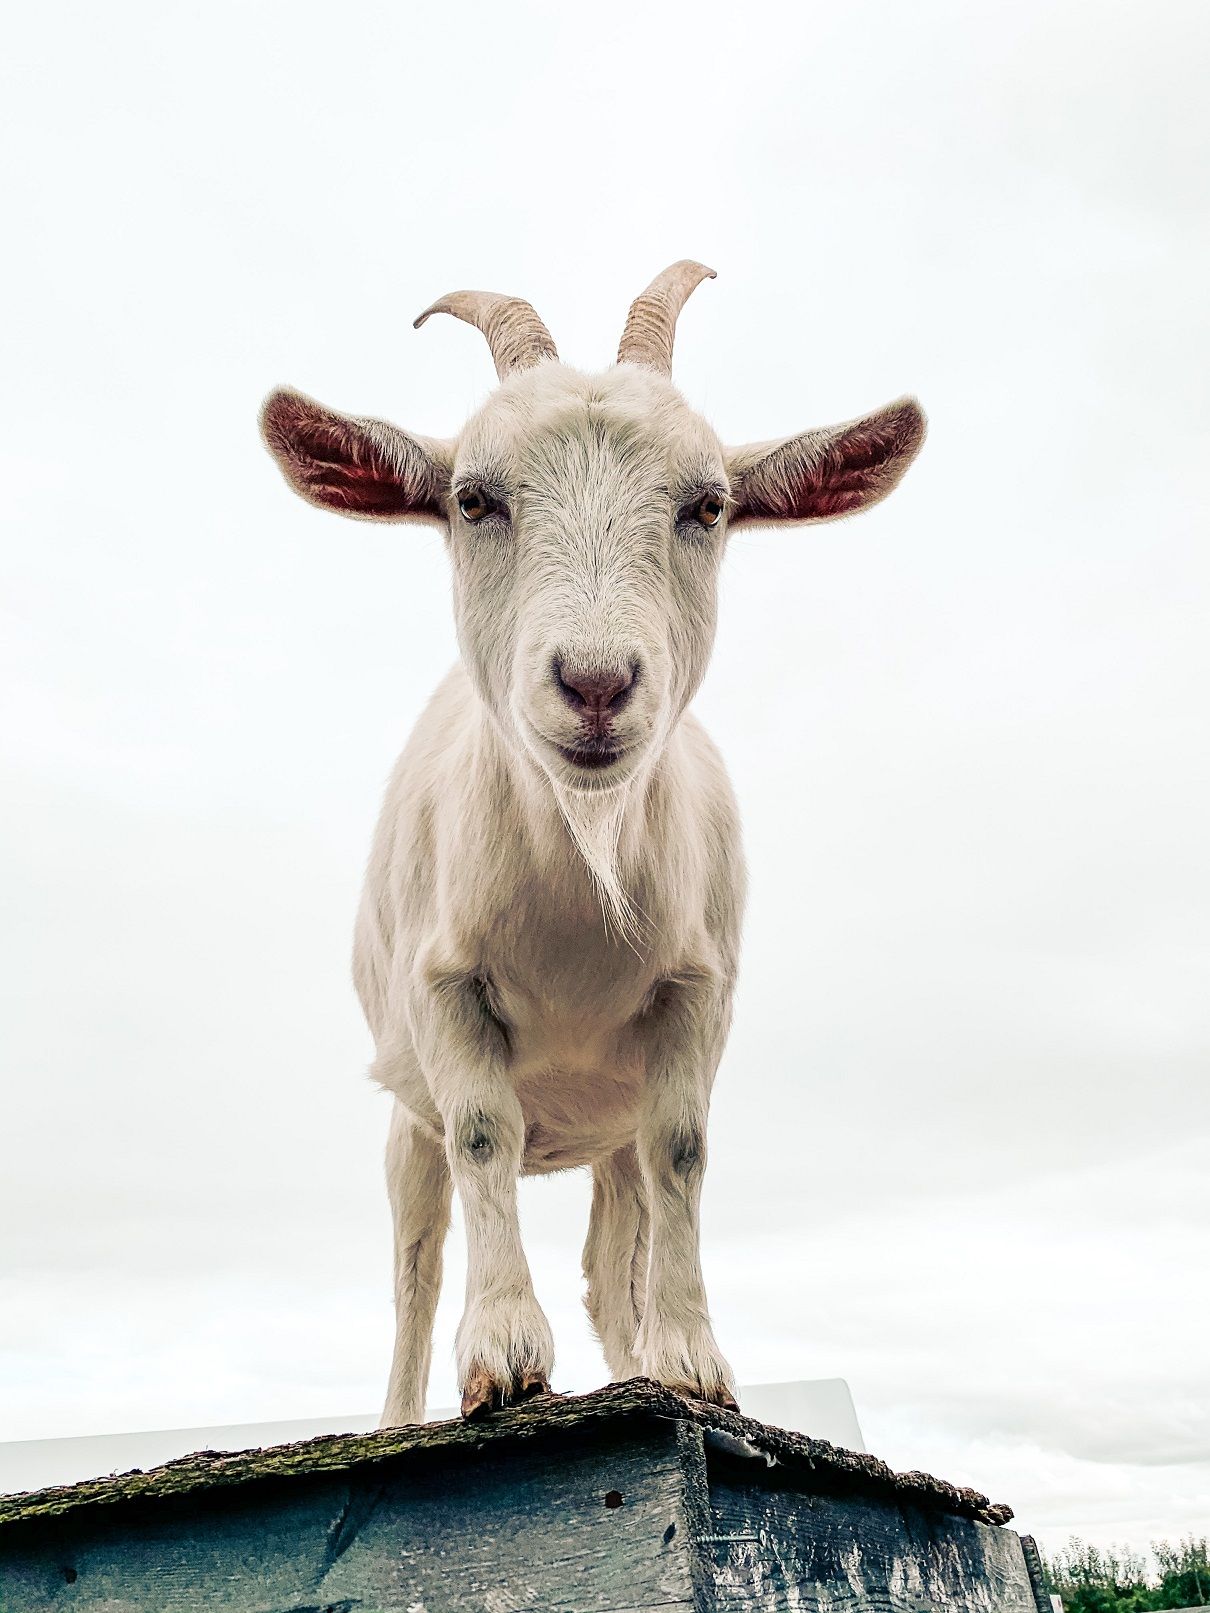 goat standing on object